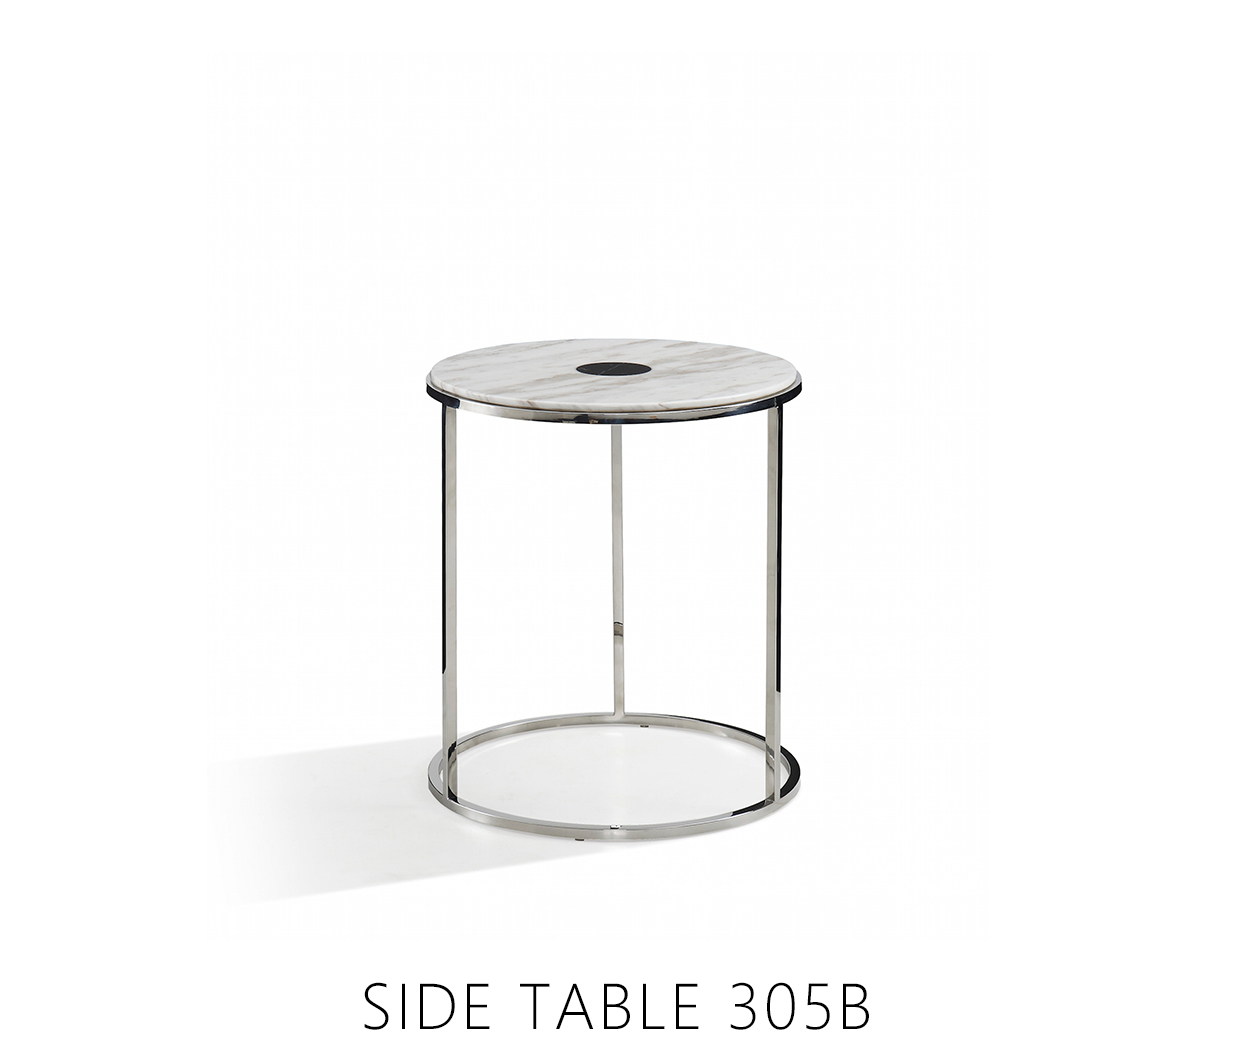 SIDE TABLE 305B